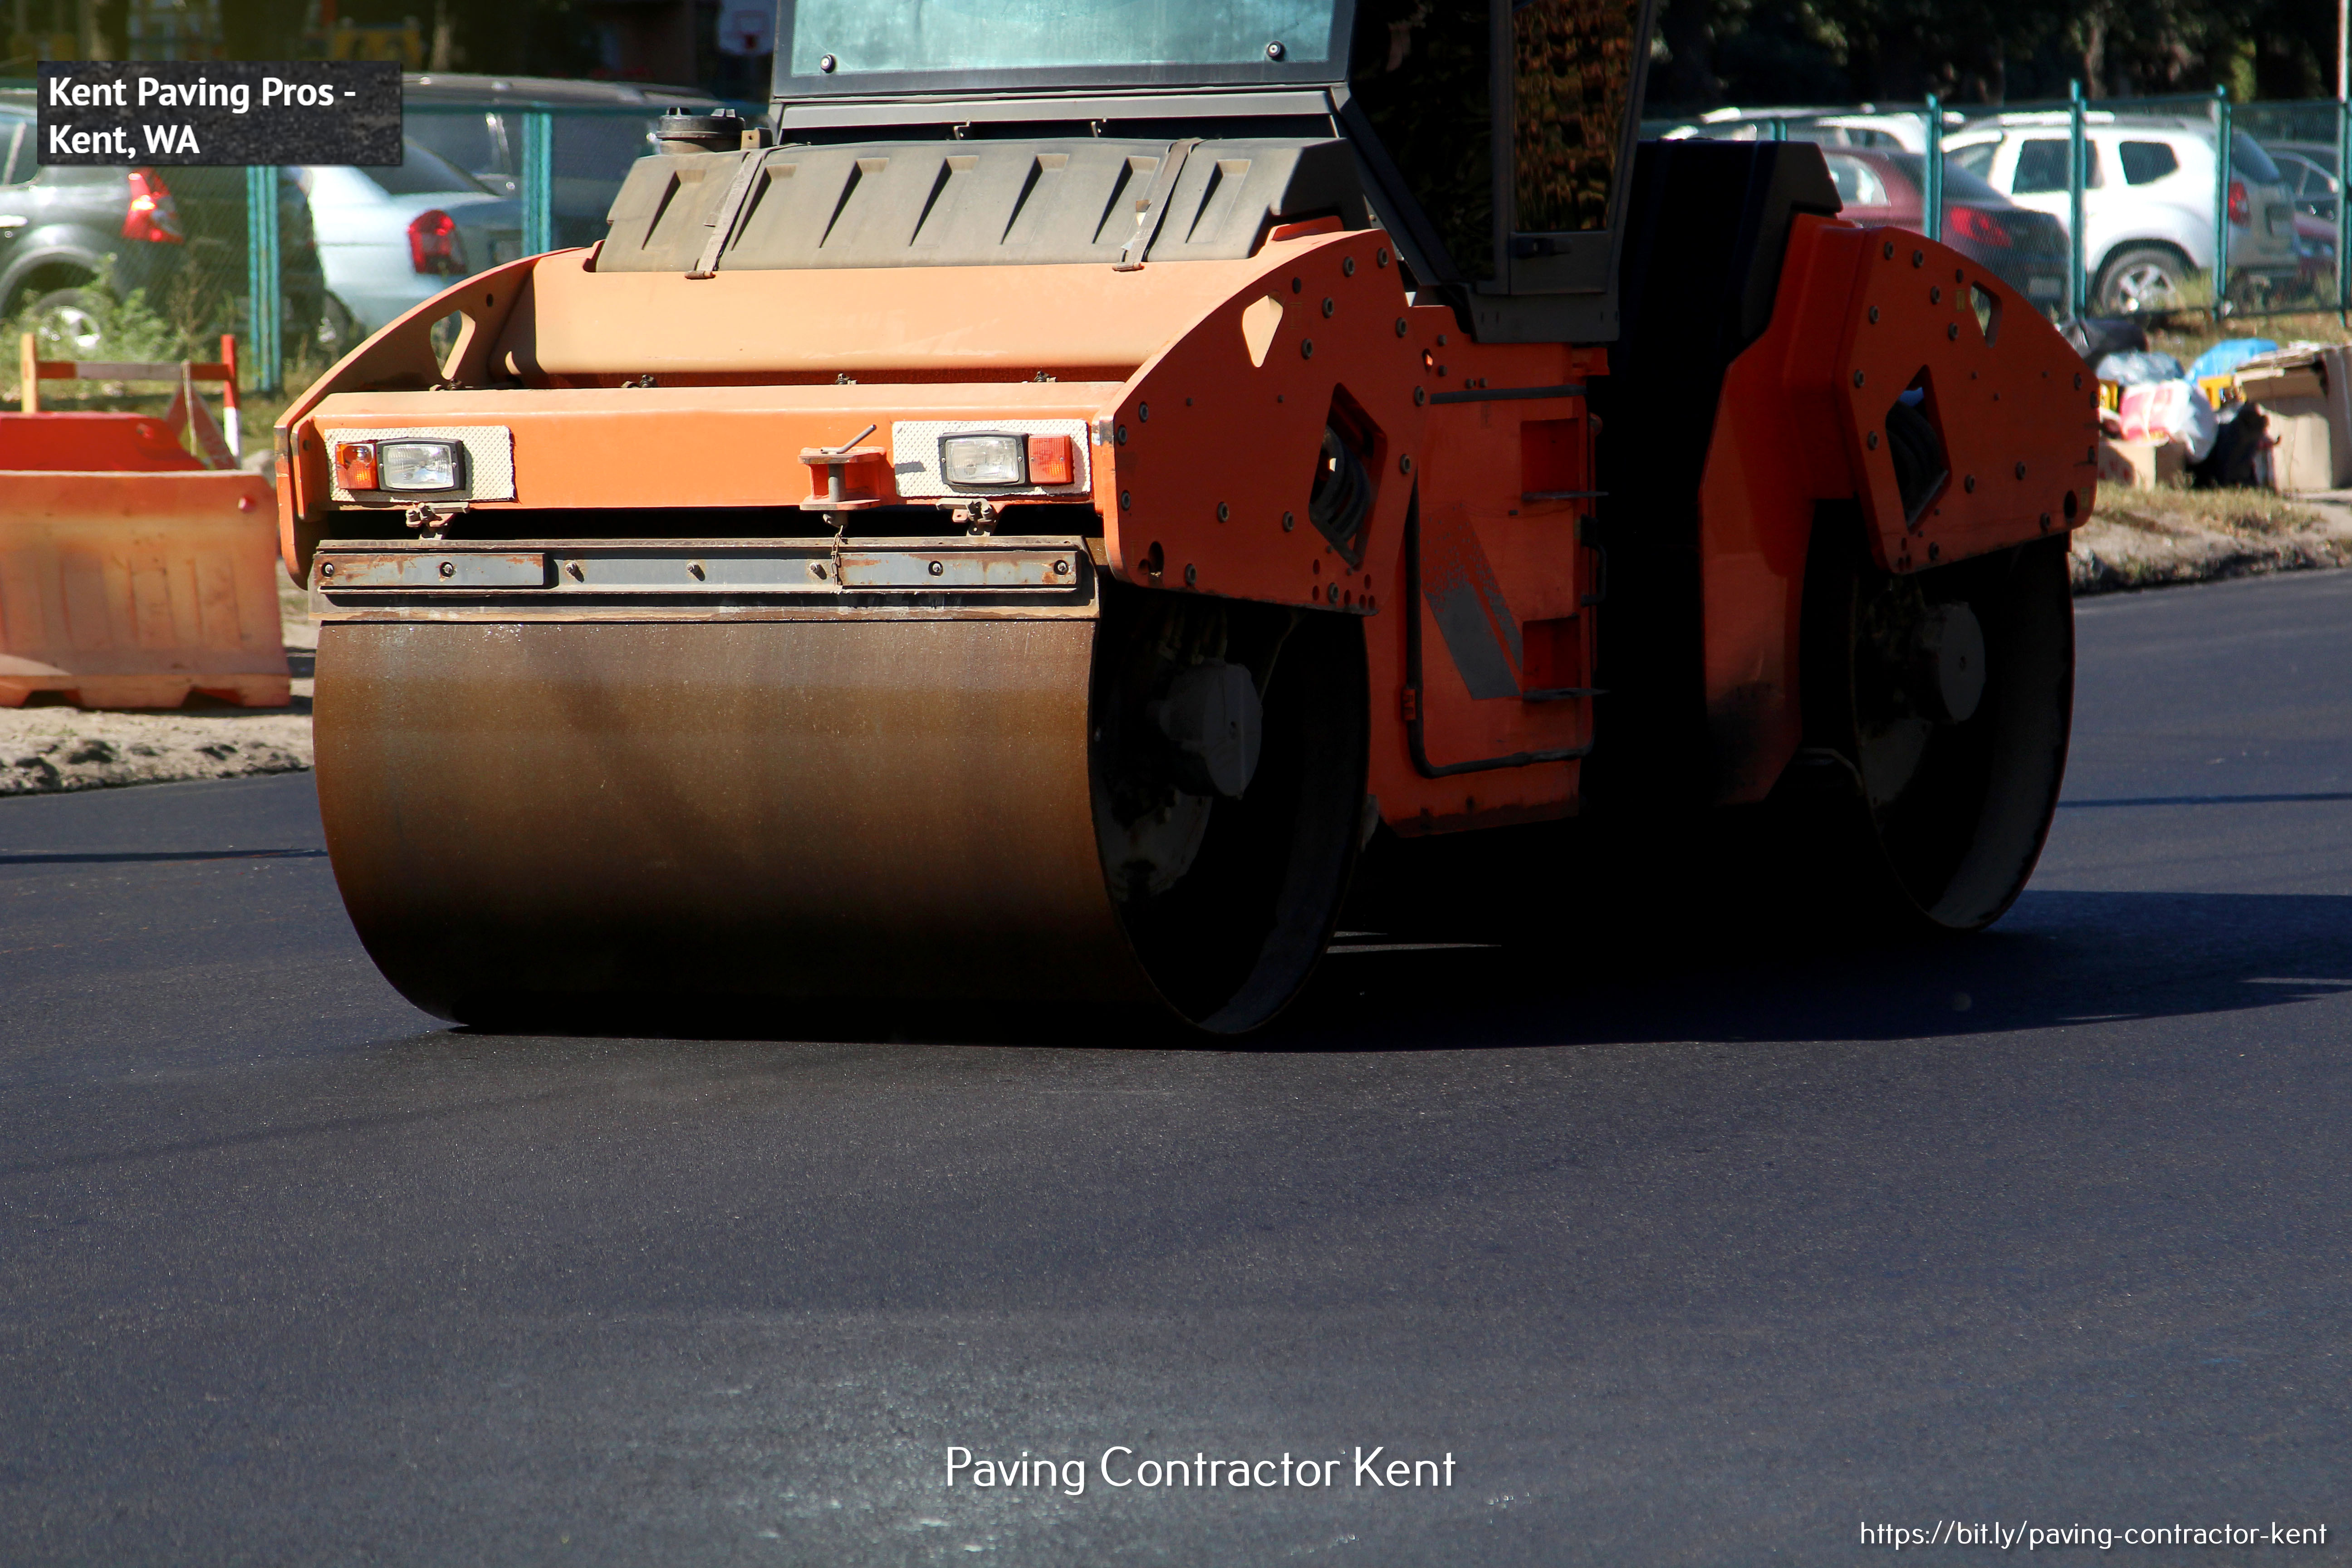 Kent Paving Pros Highlight the Advantages of Hiring a Local Paving Contractor